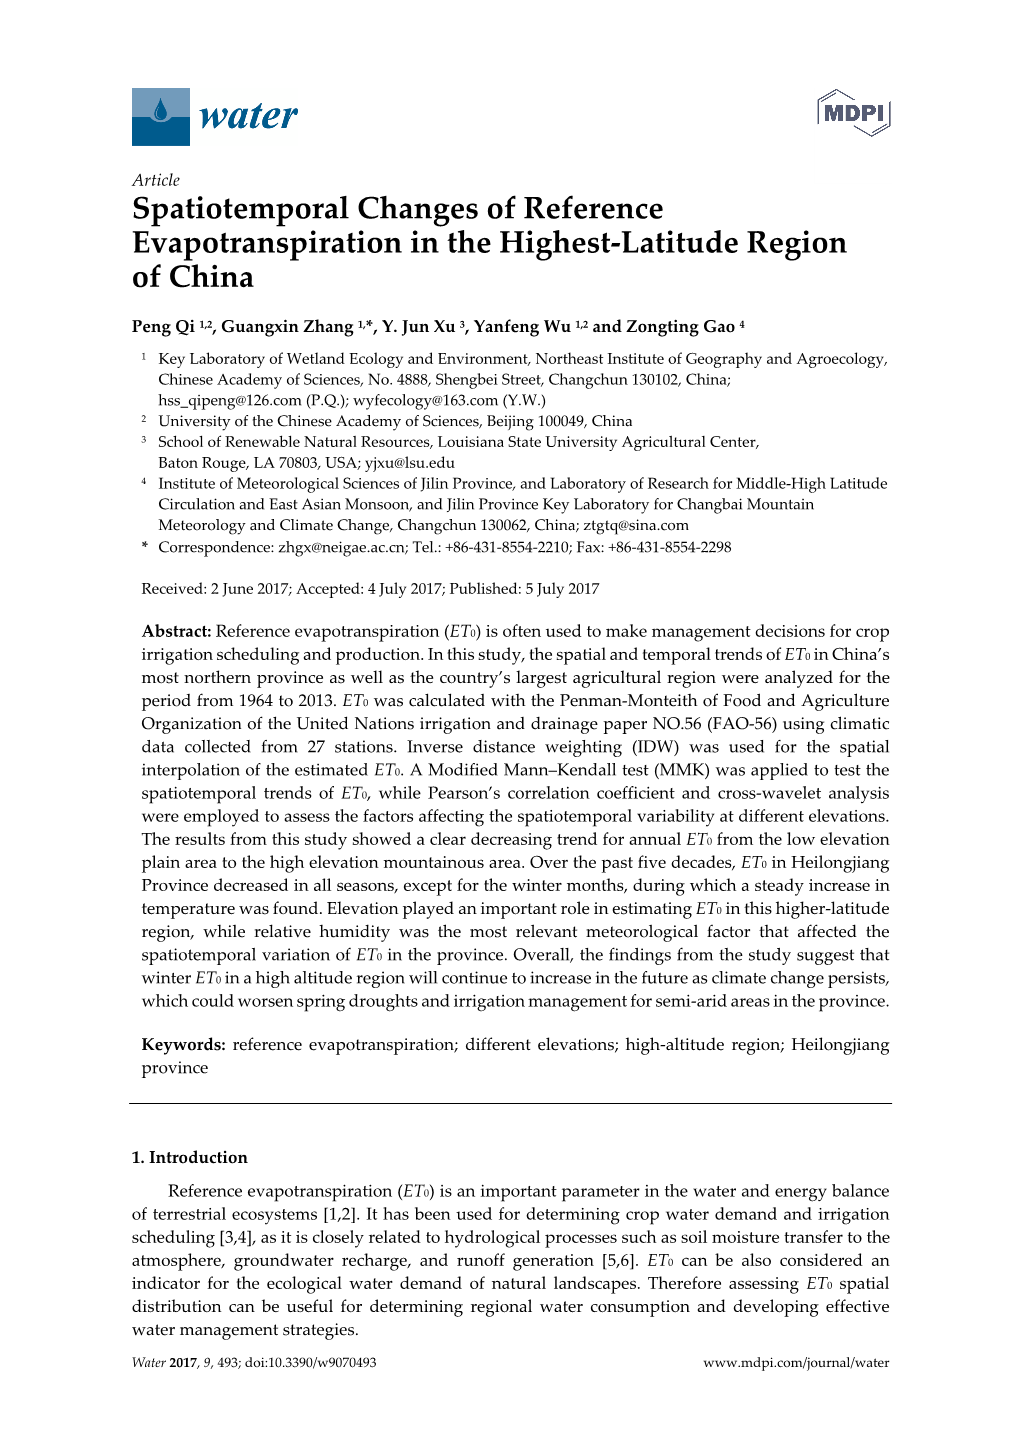 Spatiotemporal Changes of Reference Evapotranspiration in the Highest-Latitude Region of China